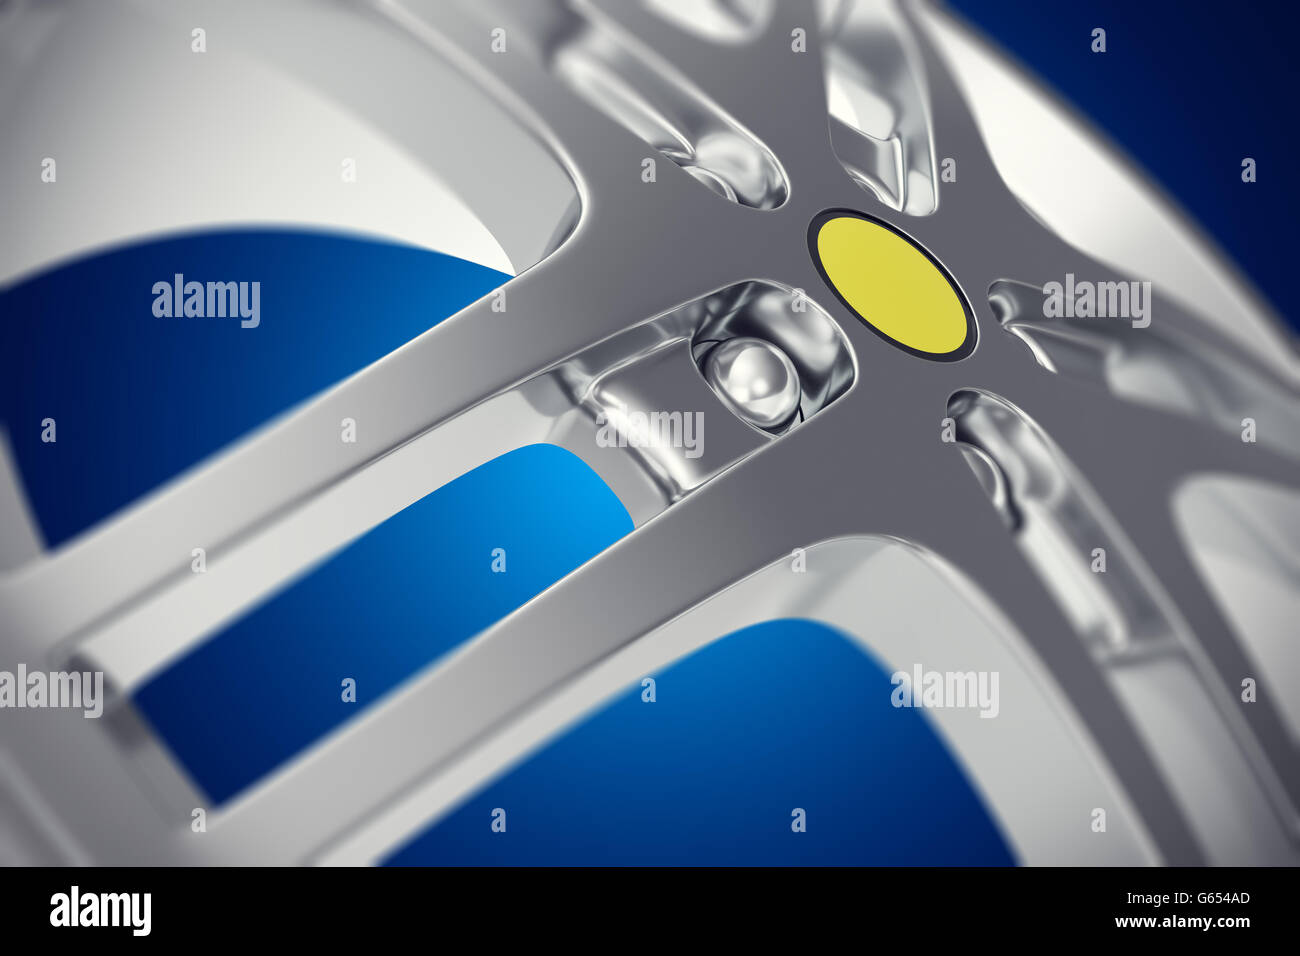 Car rim close-up view with depth of field effect on blue background. 3d illustration Stock Photo